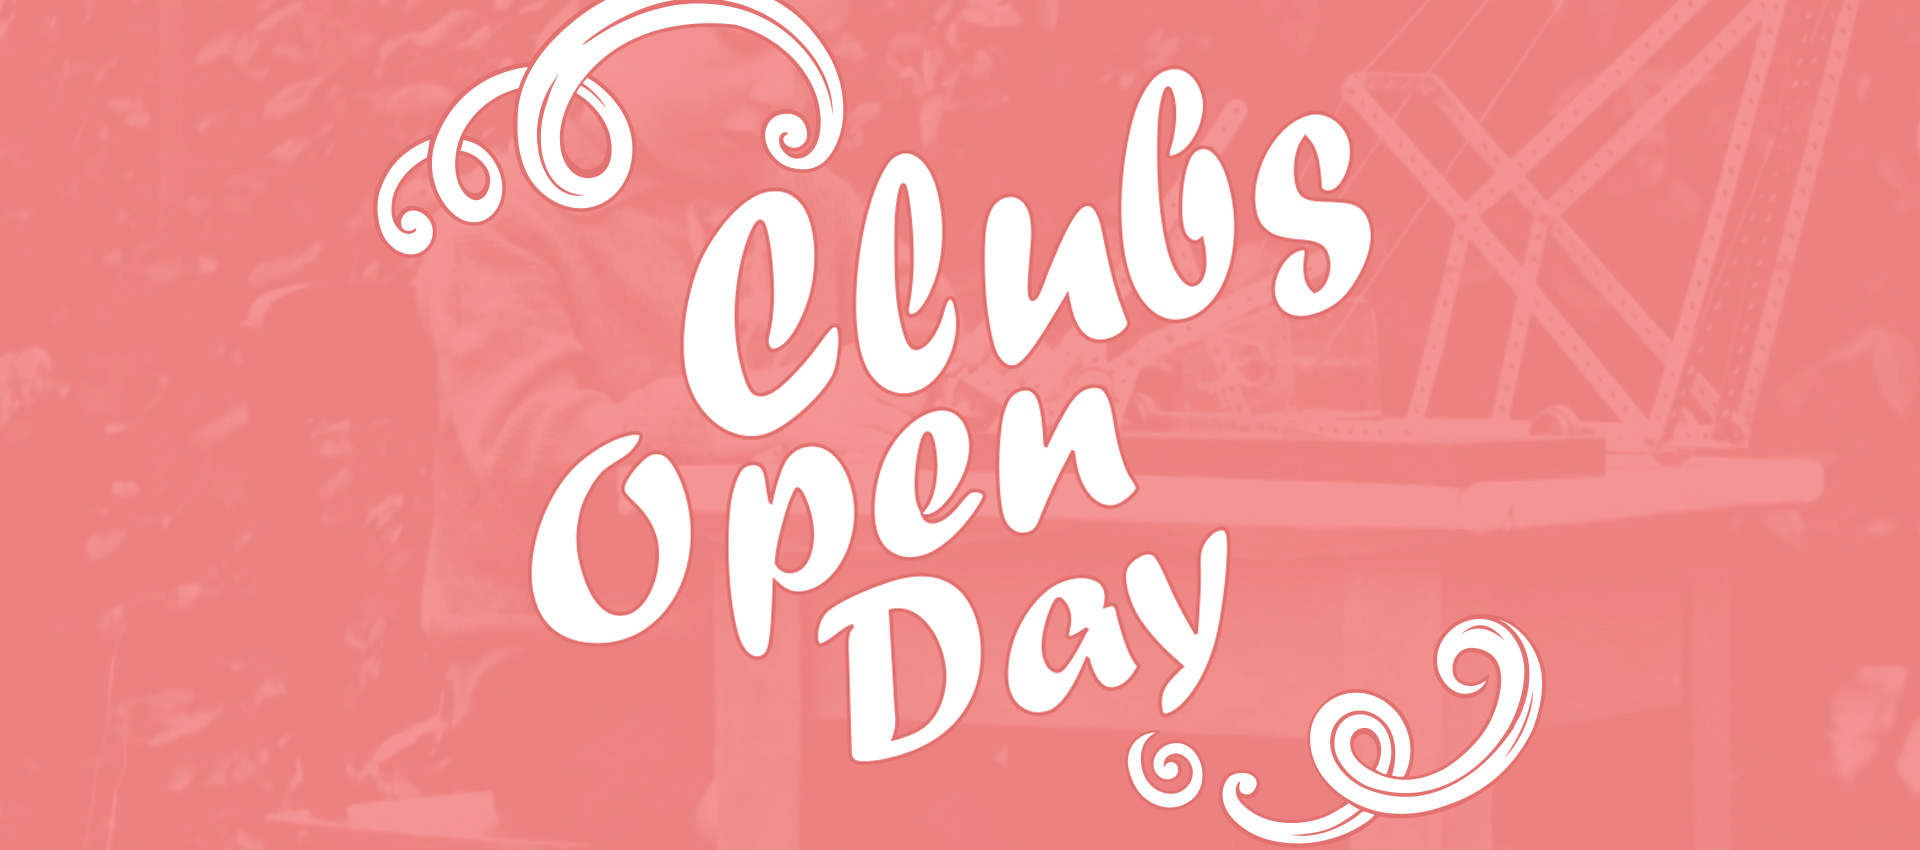 White text on a pink background: Clubs Open Day